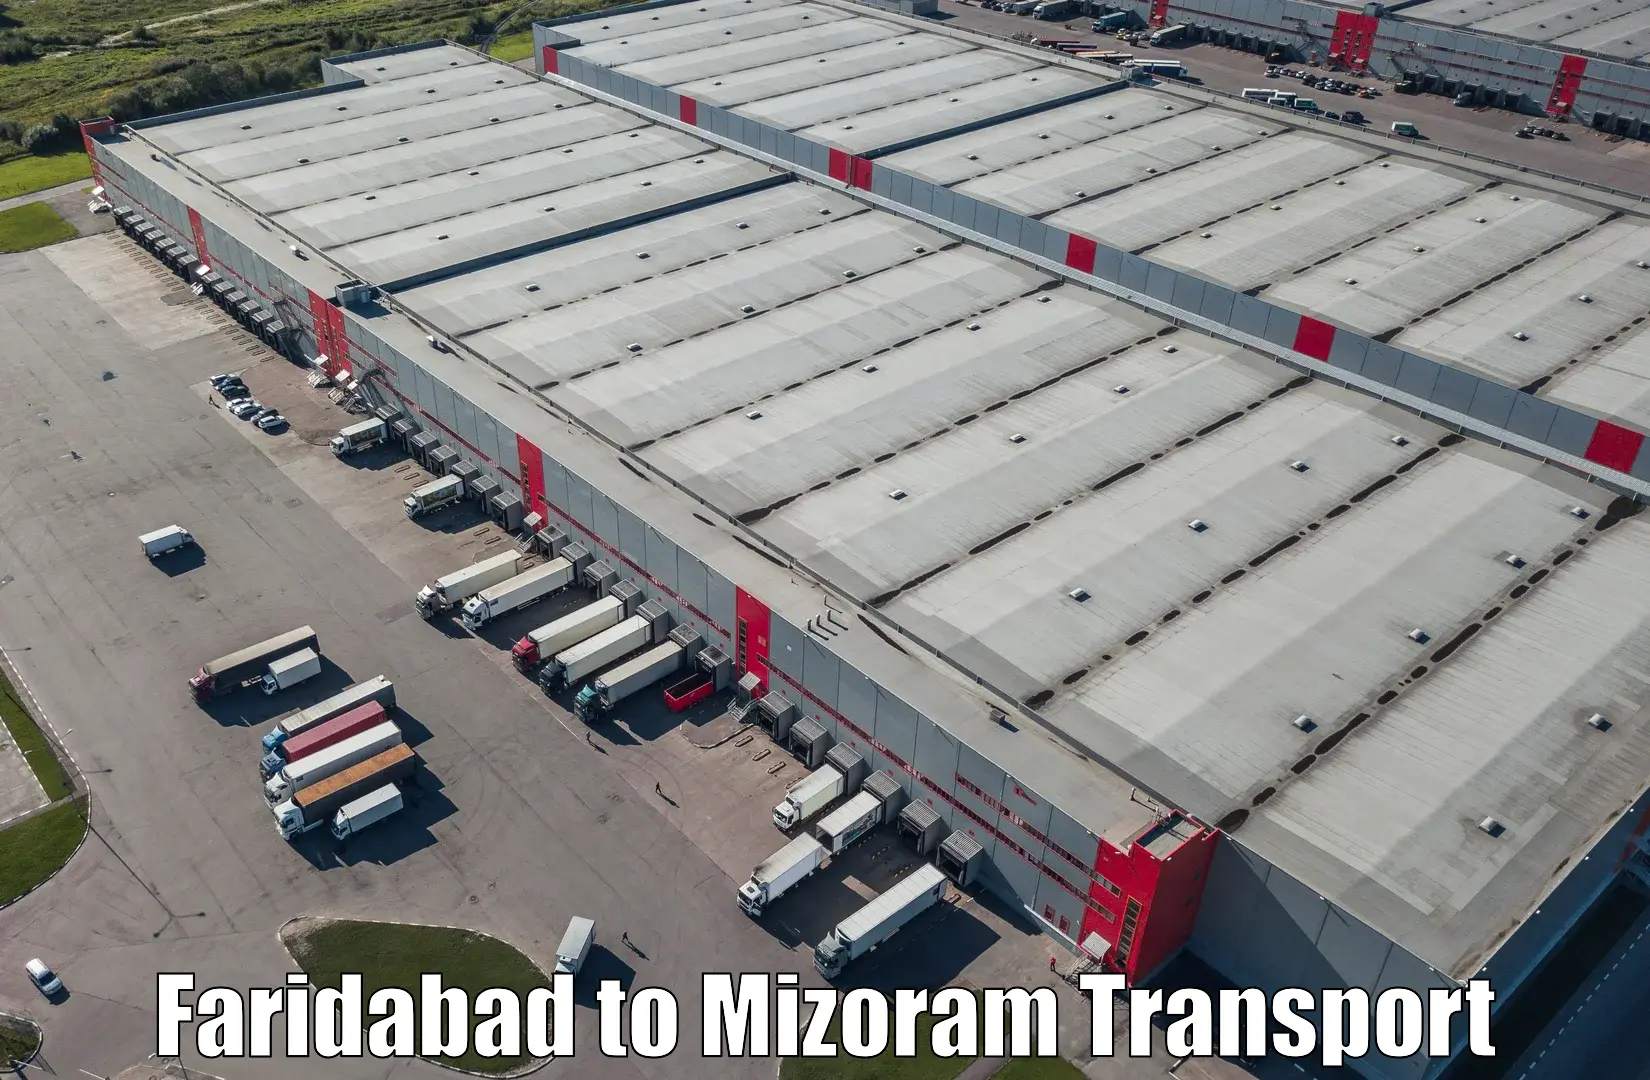 Land transport services in Faridabad to Serchhip